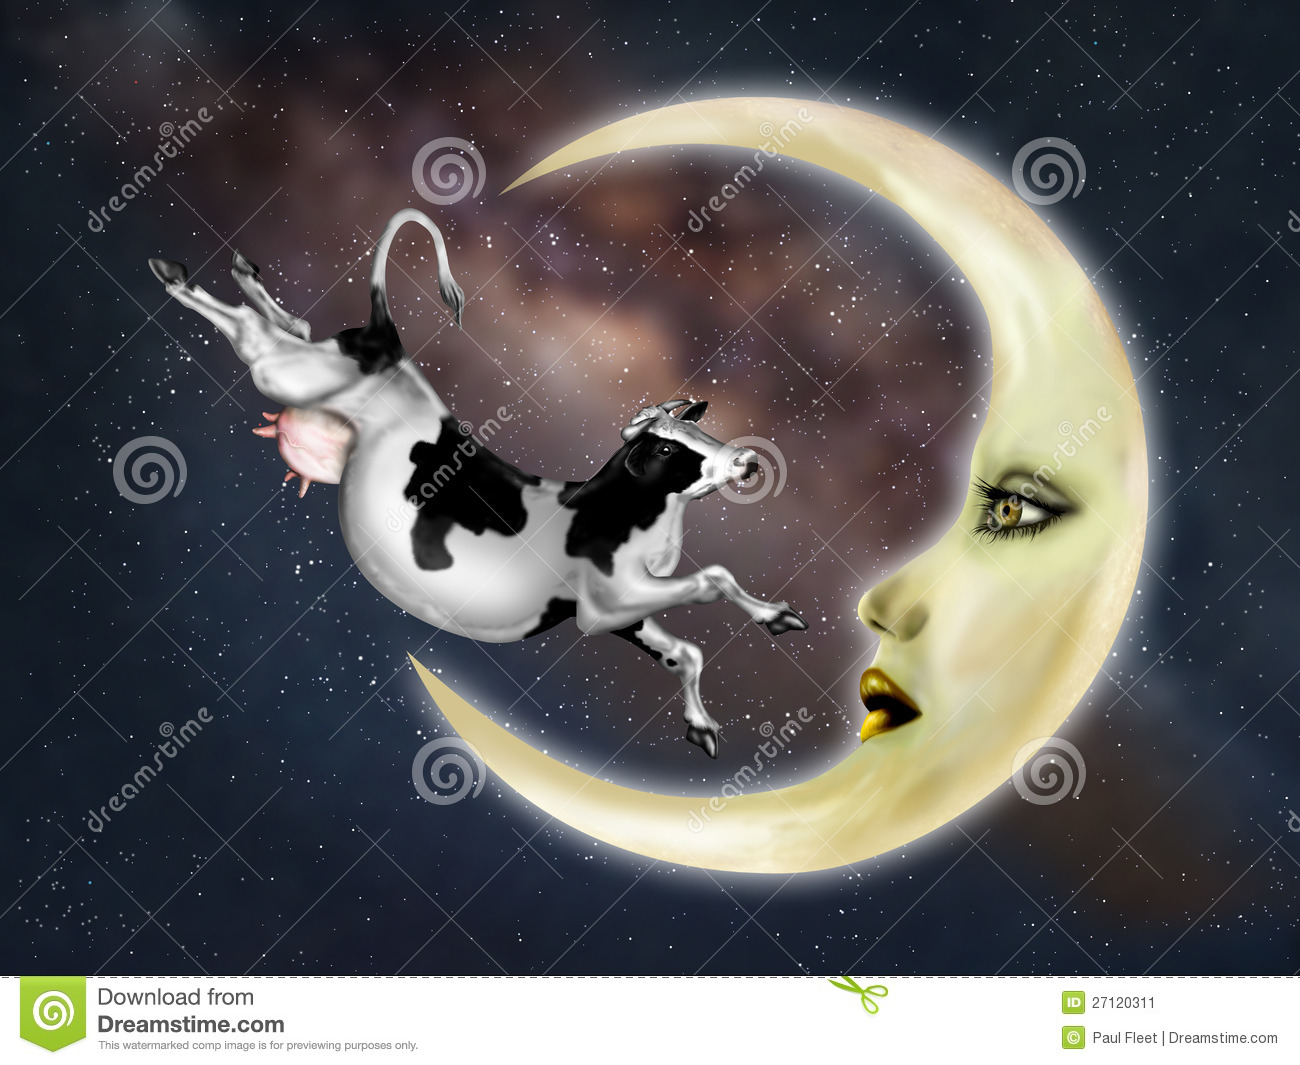 Illustration Of A Dairy Cow Jumping Over The Moon